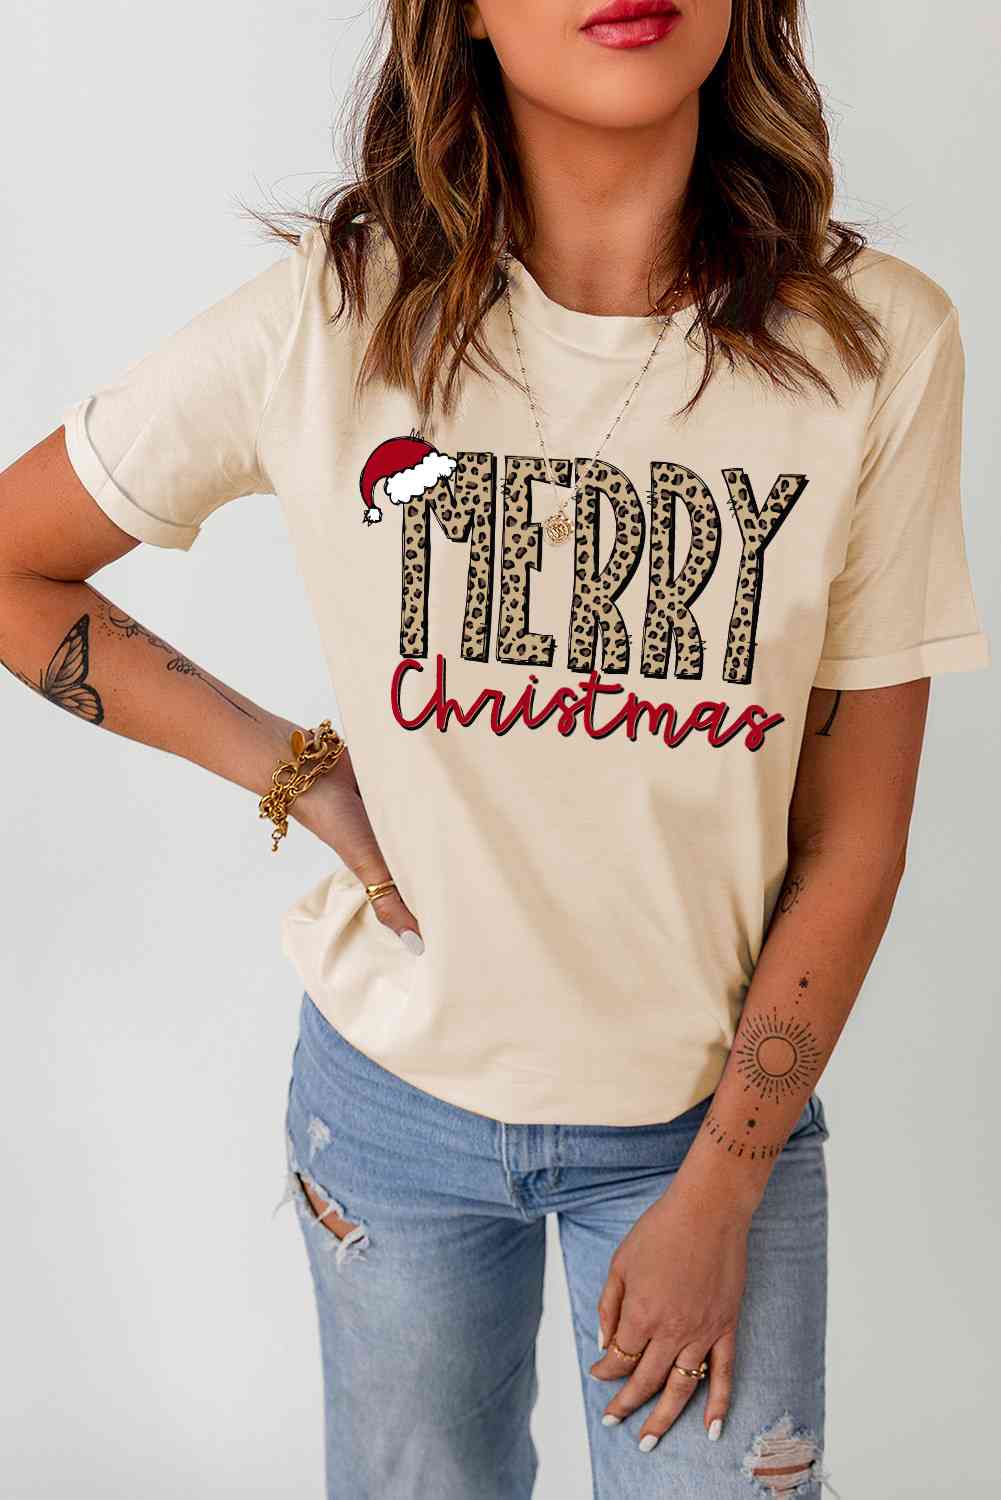 MERRY CHRISTMAS Graphic T-Shirt  Krazy Heart Designs Boutique   